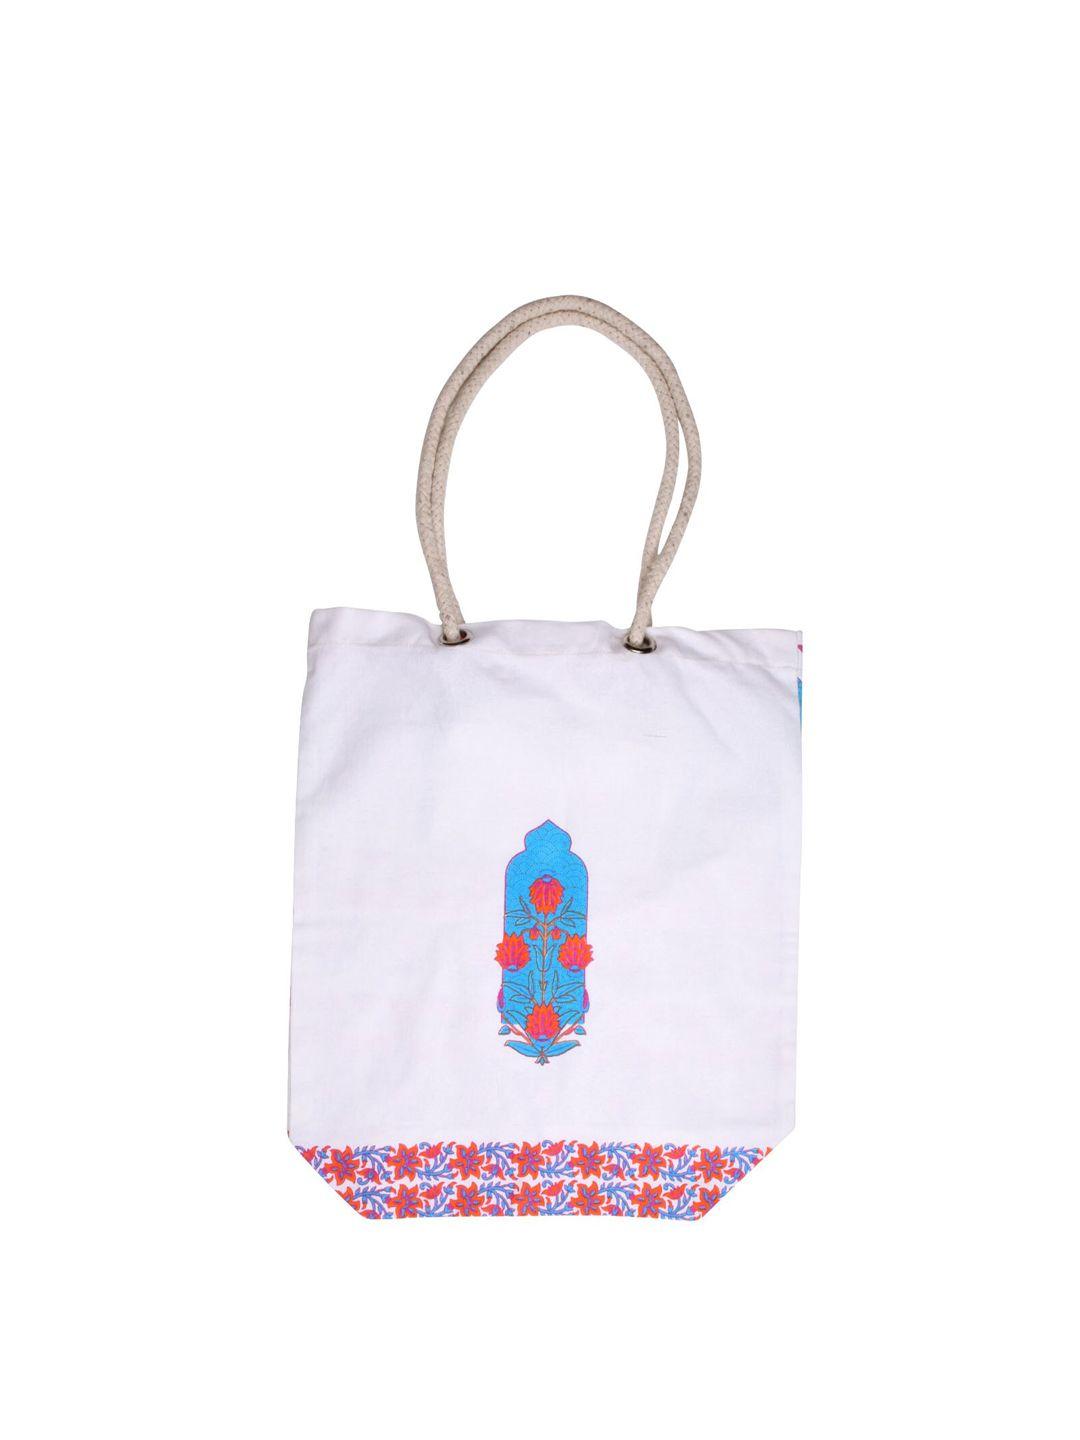 doodle white structured tote bag with applique